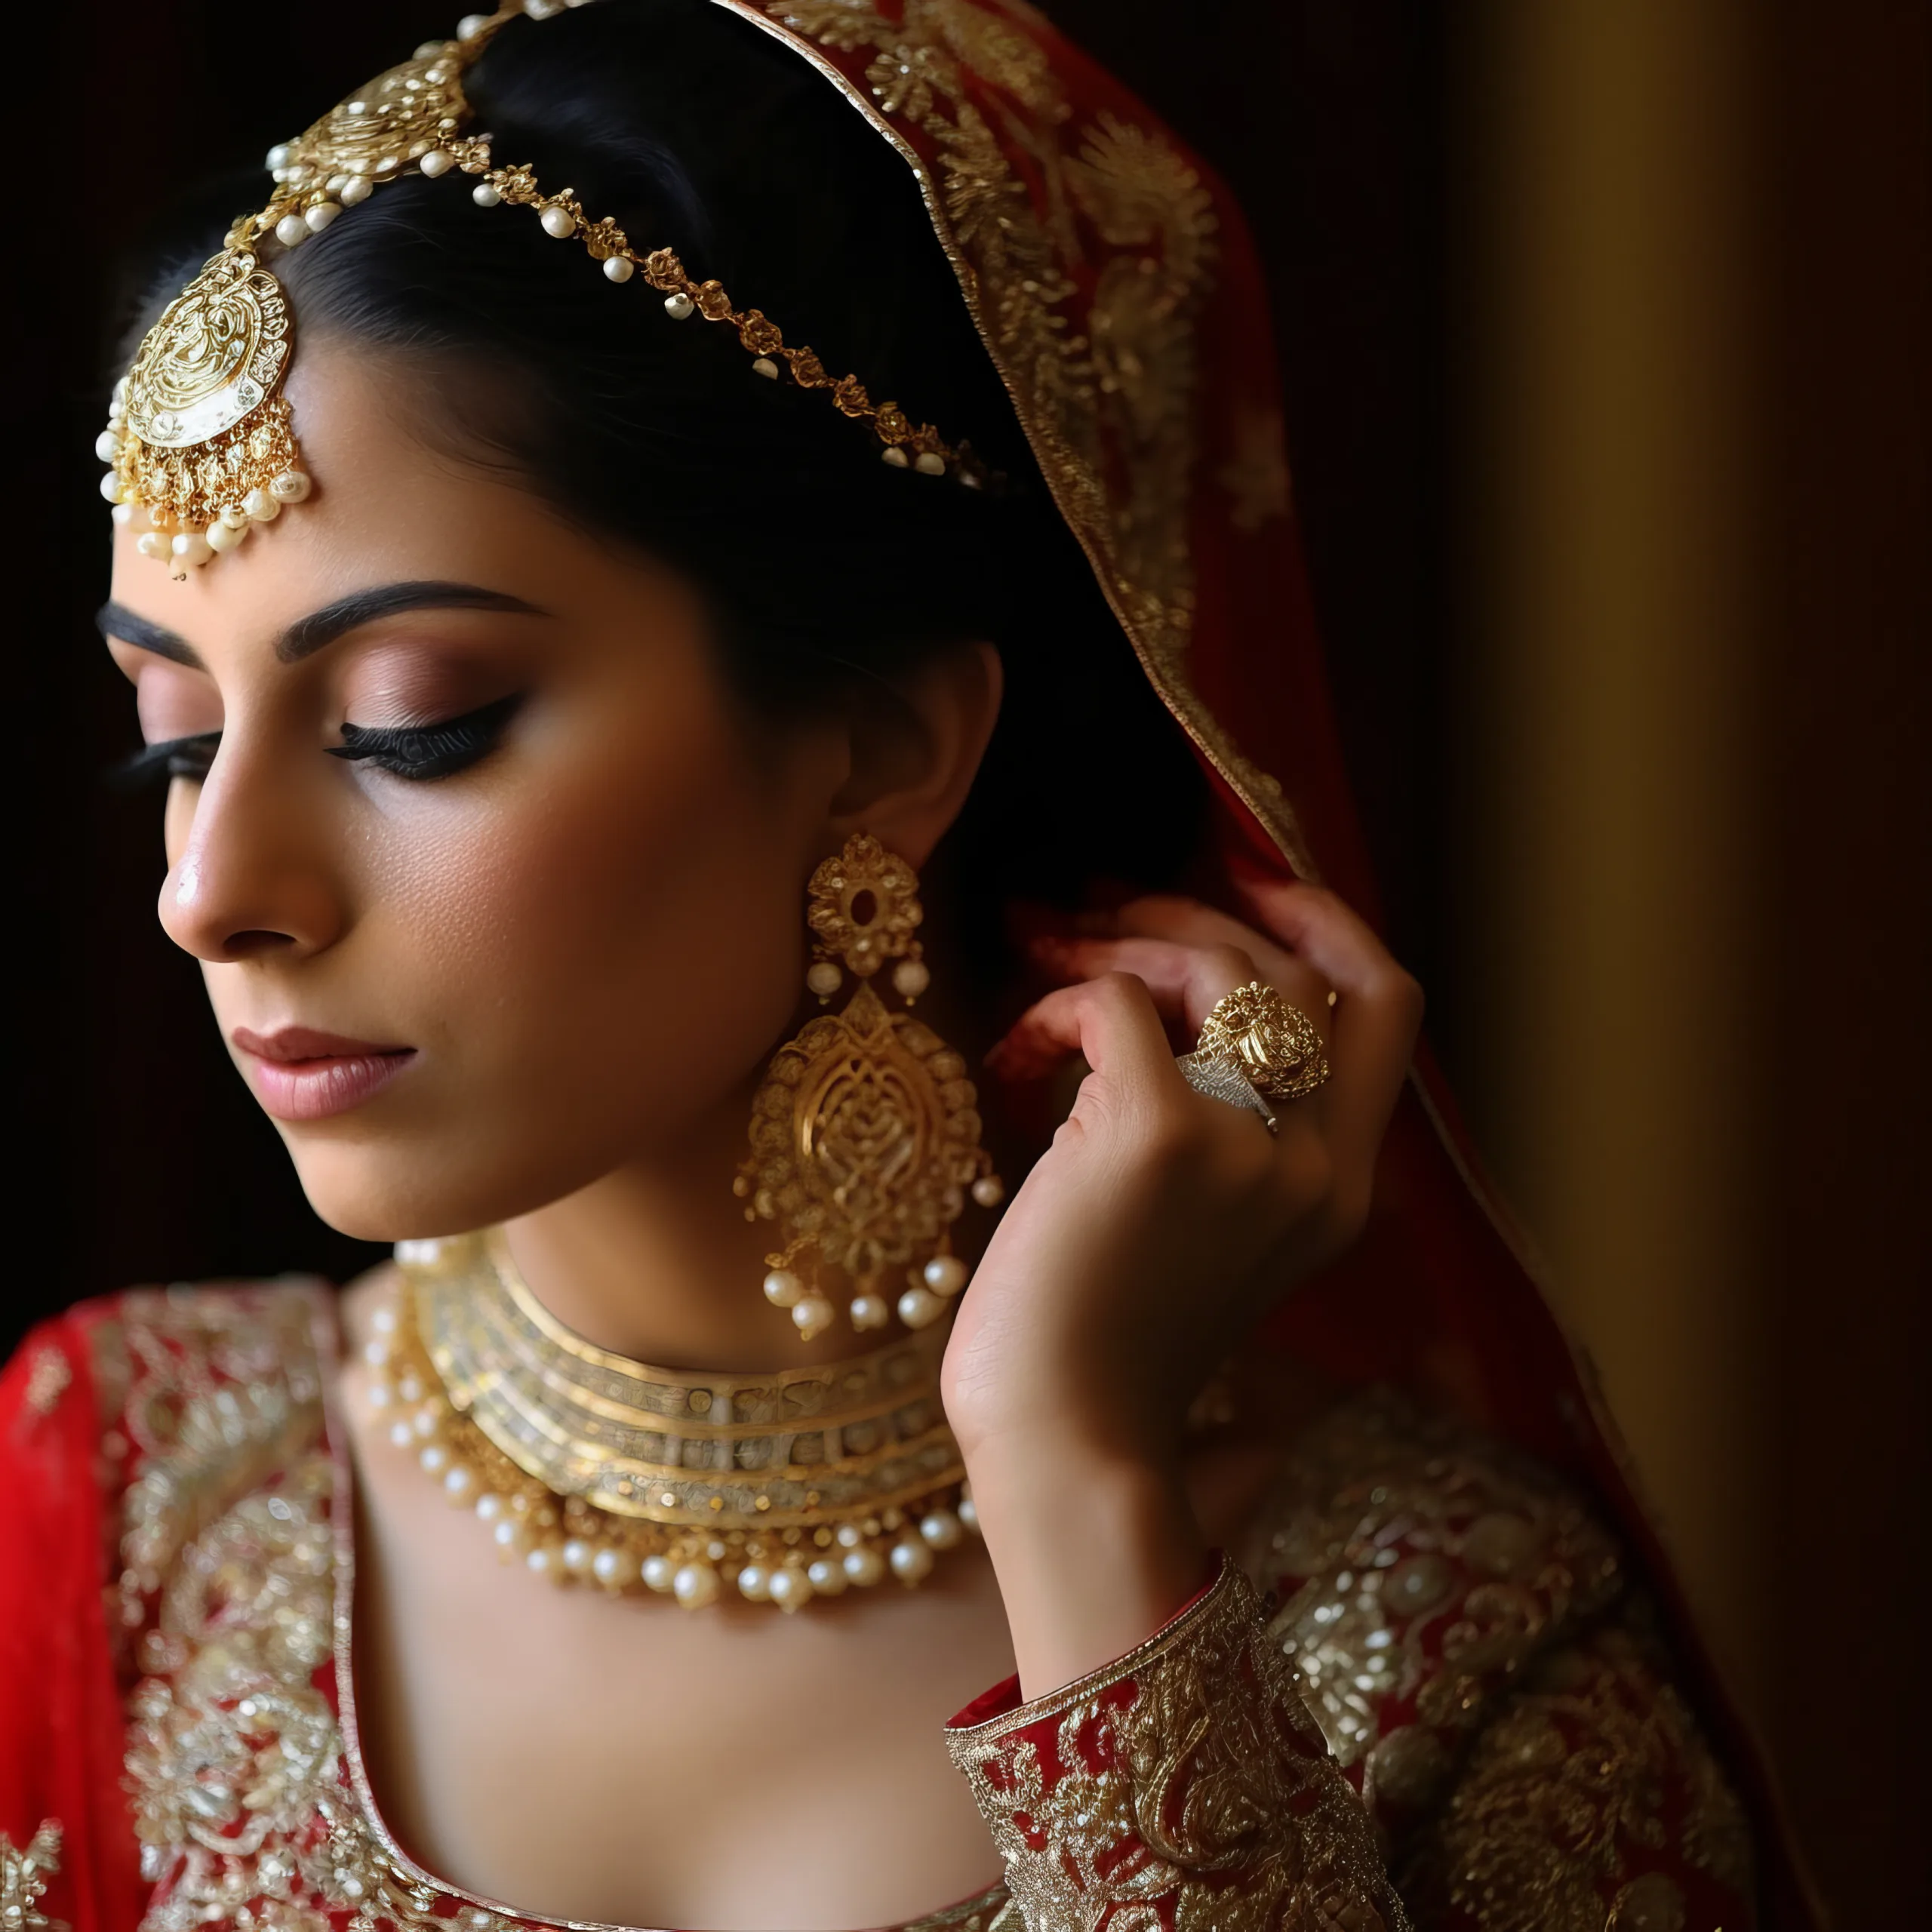 Wedding Traditions Worldwide: The Number one Bath Photographer:a woman in a red and gold bridal outfit.